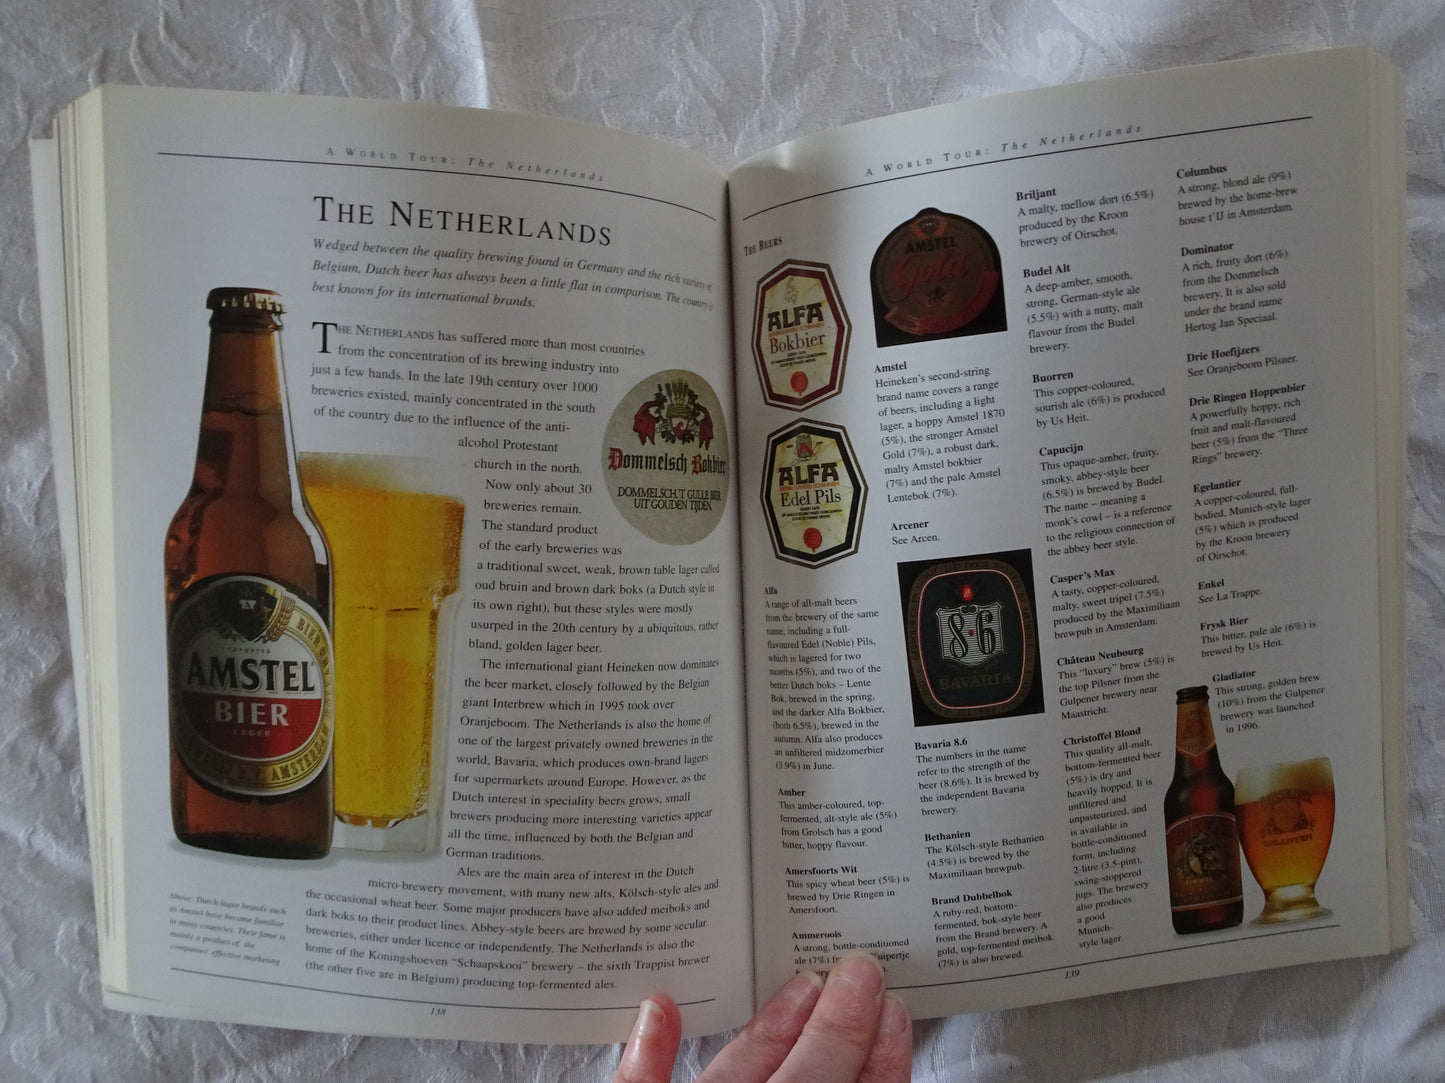 The Complete Guide to Beer by Brian Glover